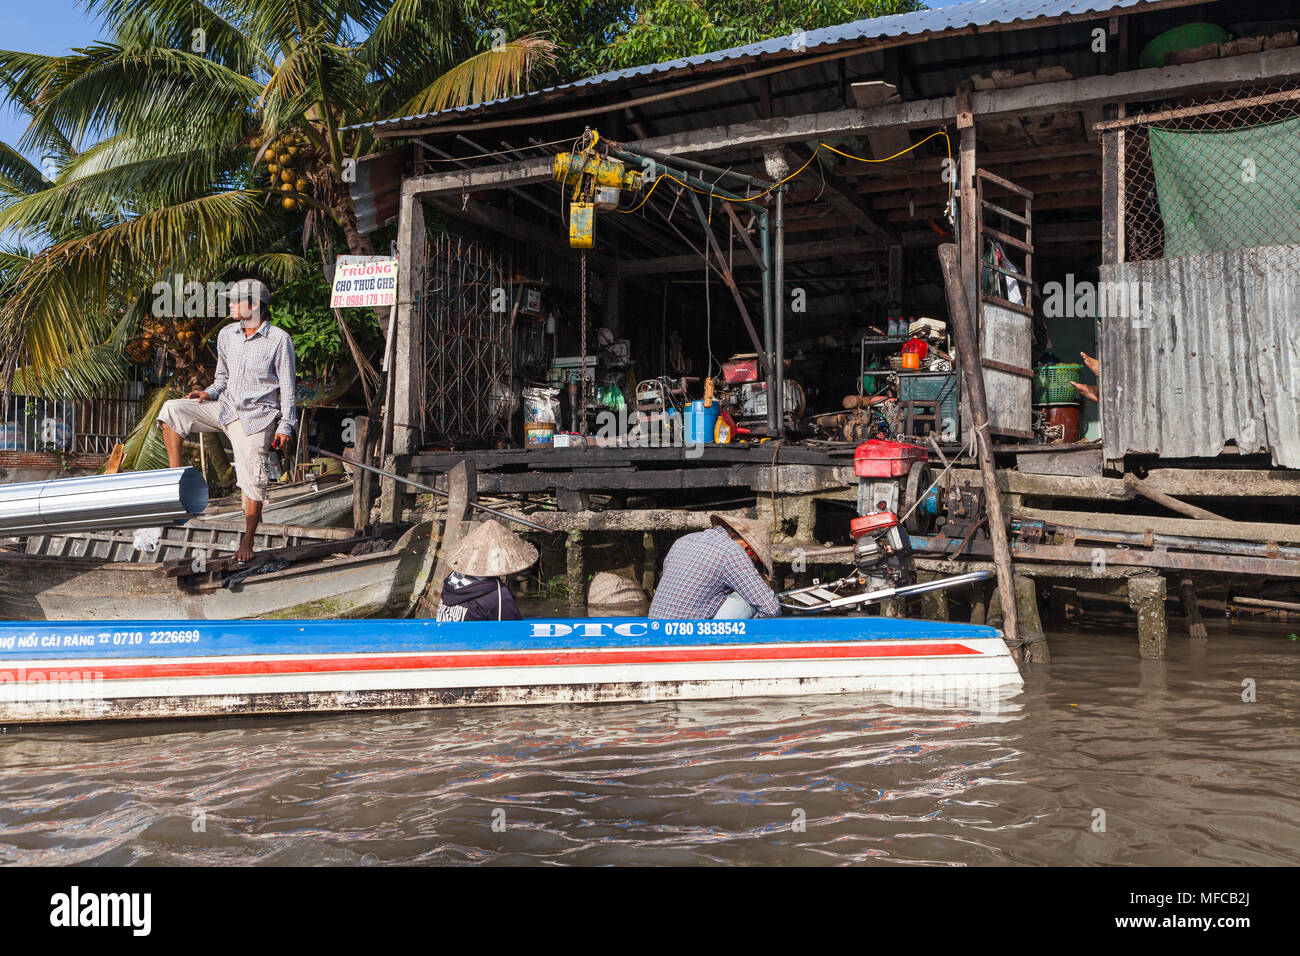 Can Tho, Vietnam - march 19 2017: boat repair workshop on the Mekong delta river Stock Photo